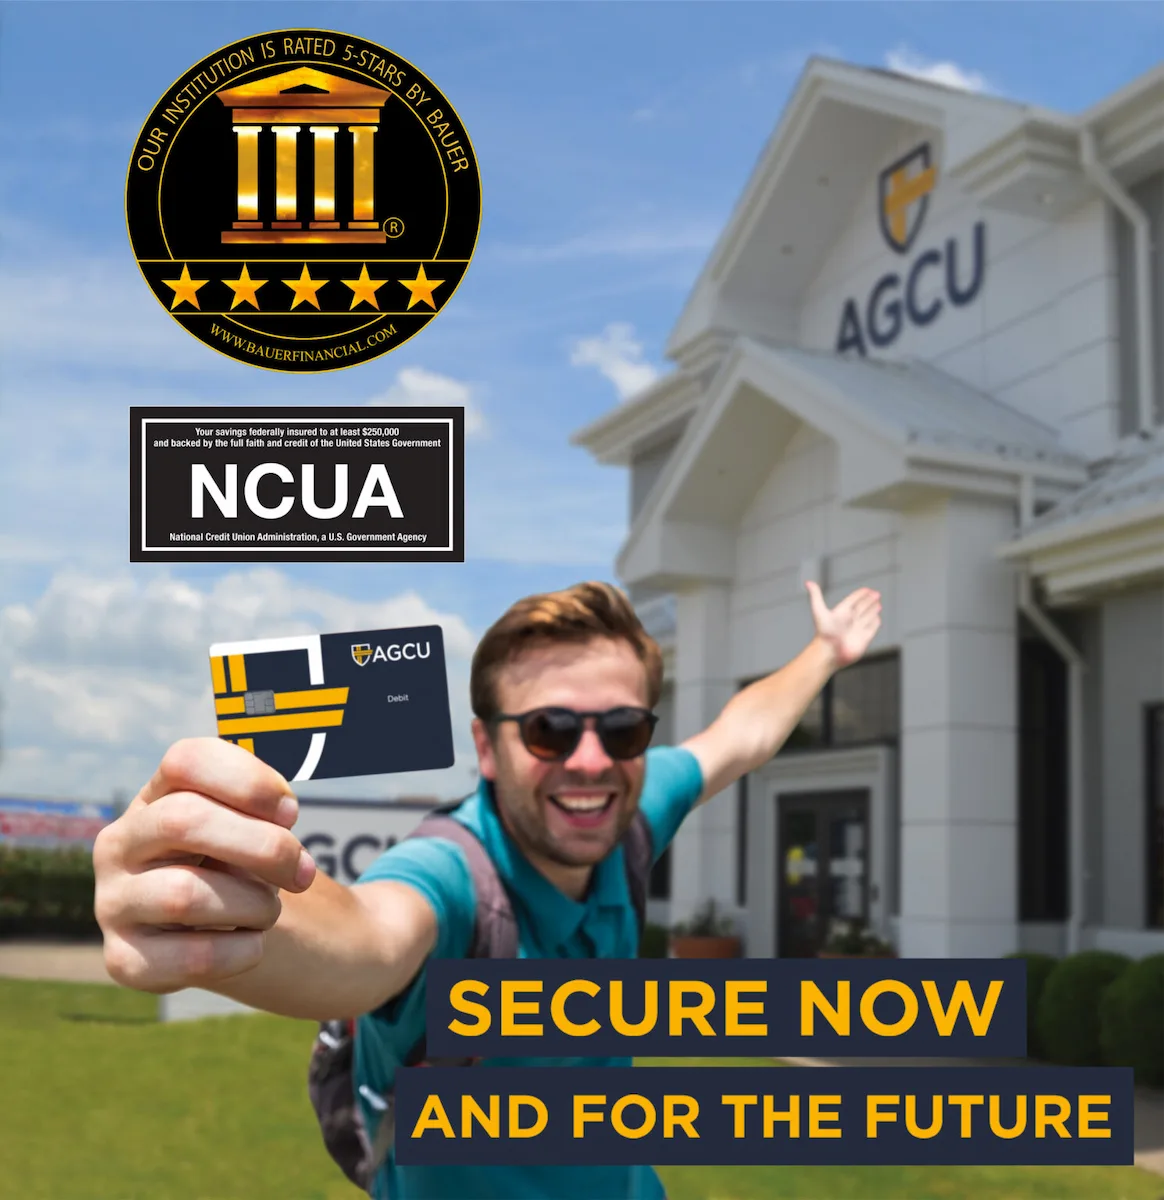 Secure Now and for the future